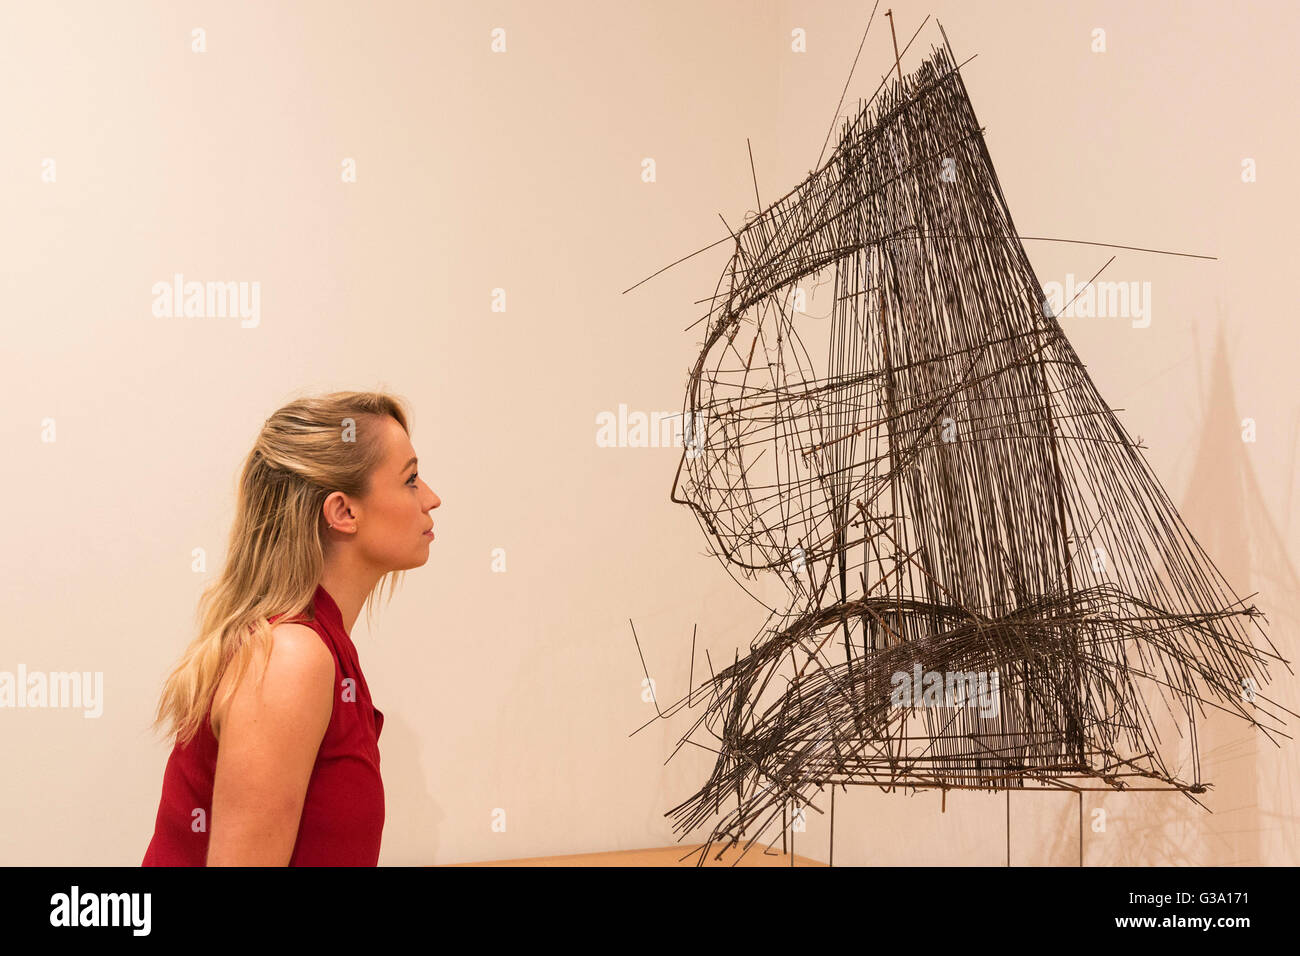 London, UK. 9 June 2016. A gallery employee looks at the sculpture El Dibujo como pretexto II, 2016. Marlborough Fine Art present the exhibition Manolo Valdes: Recent Work, Paintings & Sculptures from 10 June to 16 July 2016. Stock Photo